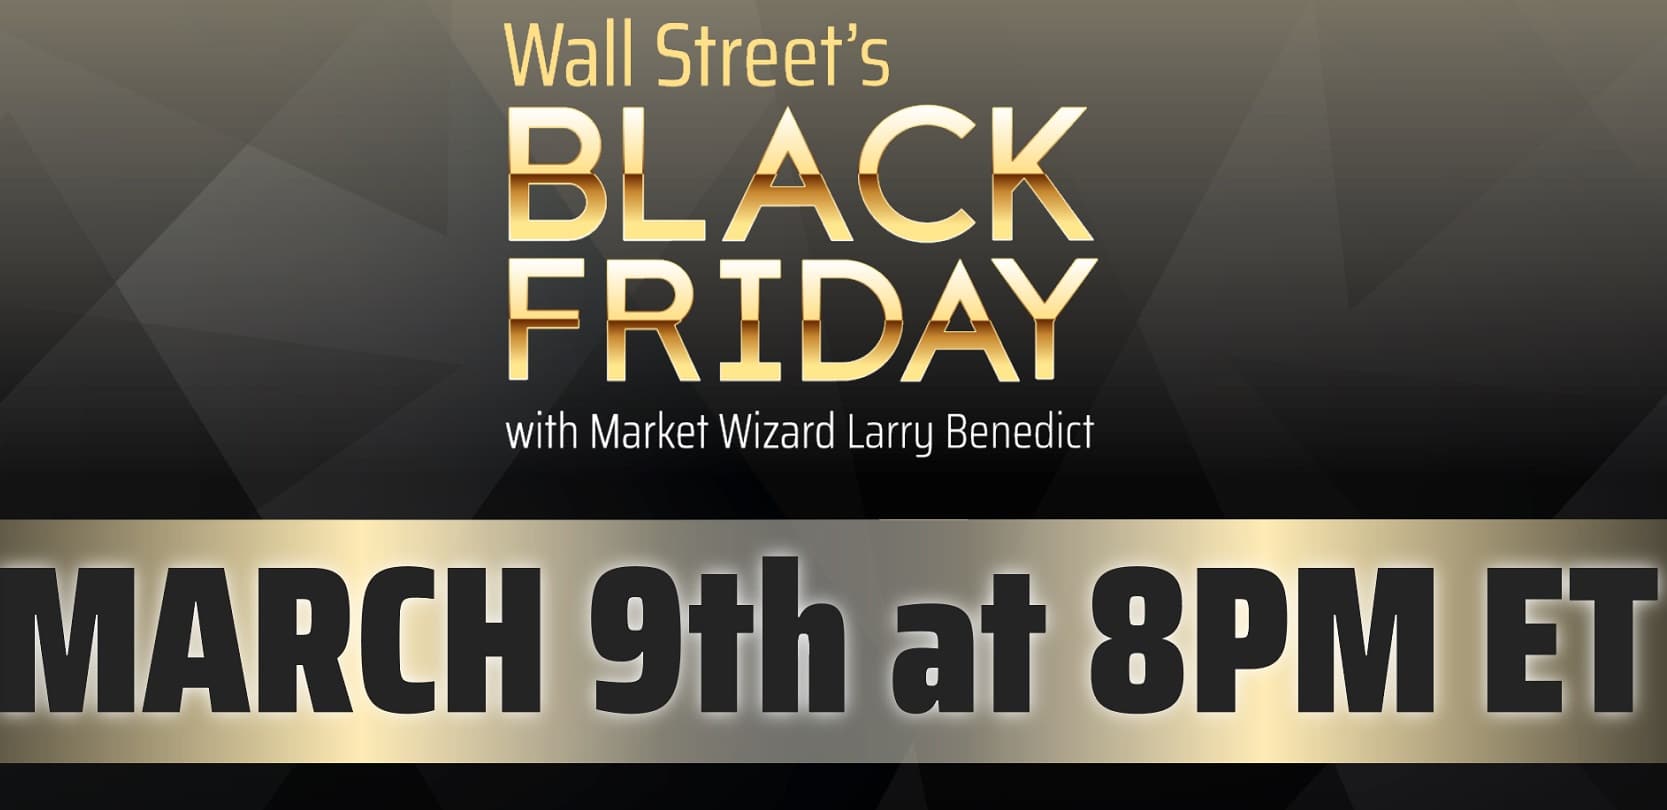 Wall Street’s Black Friday Event: Is Larry Benedict's Event Legit